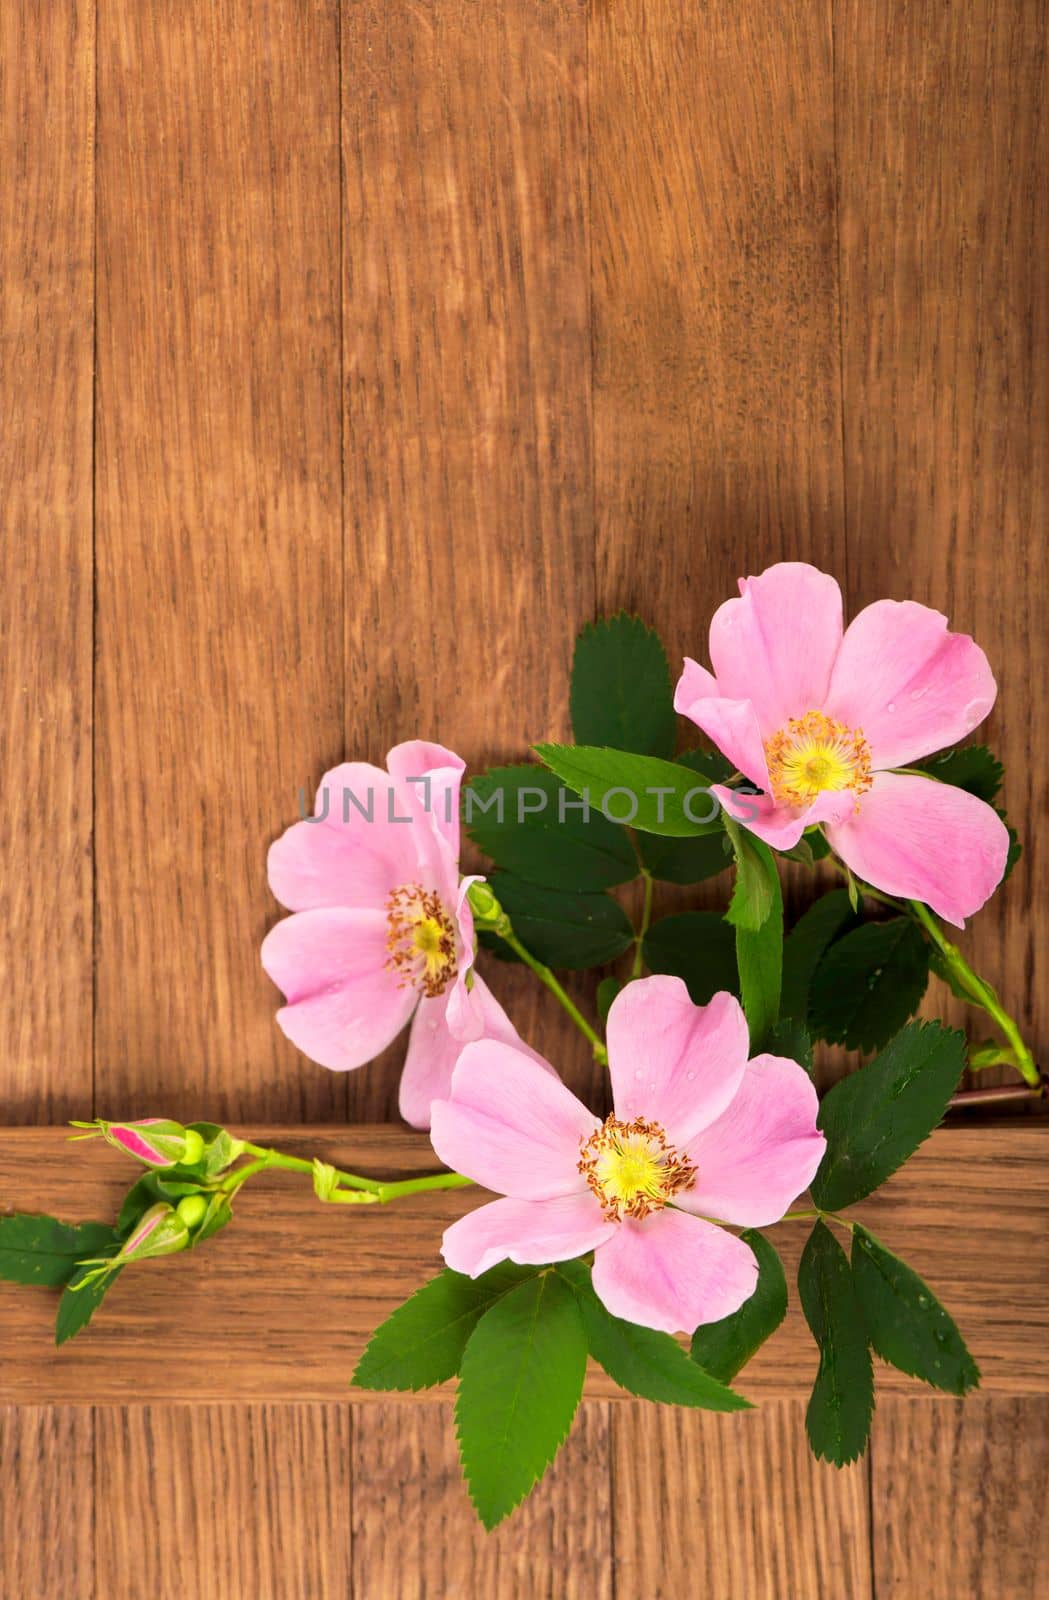 dogrose flowers on a wooden board